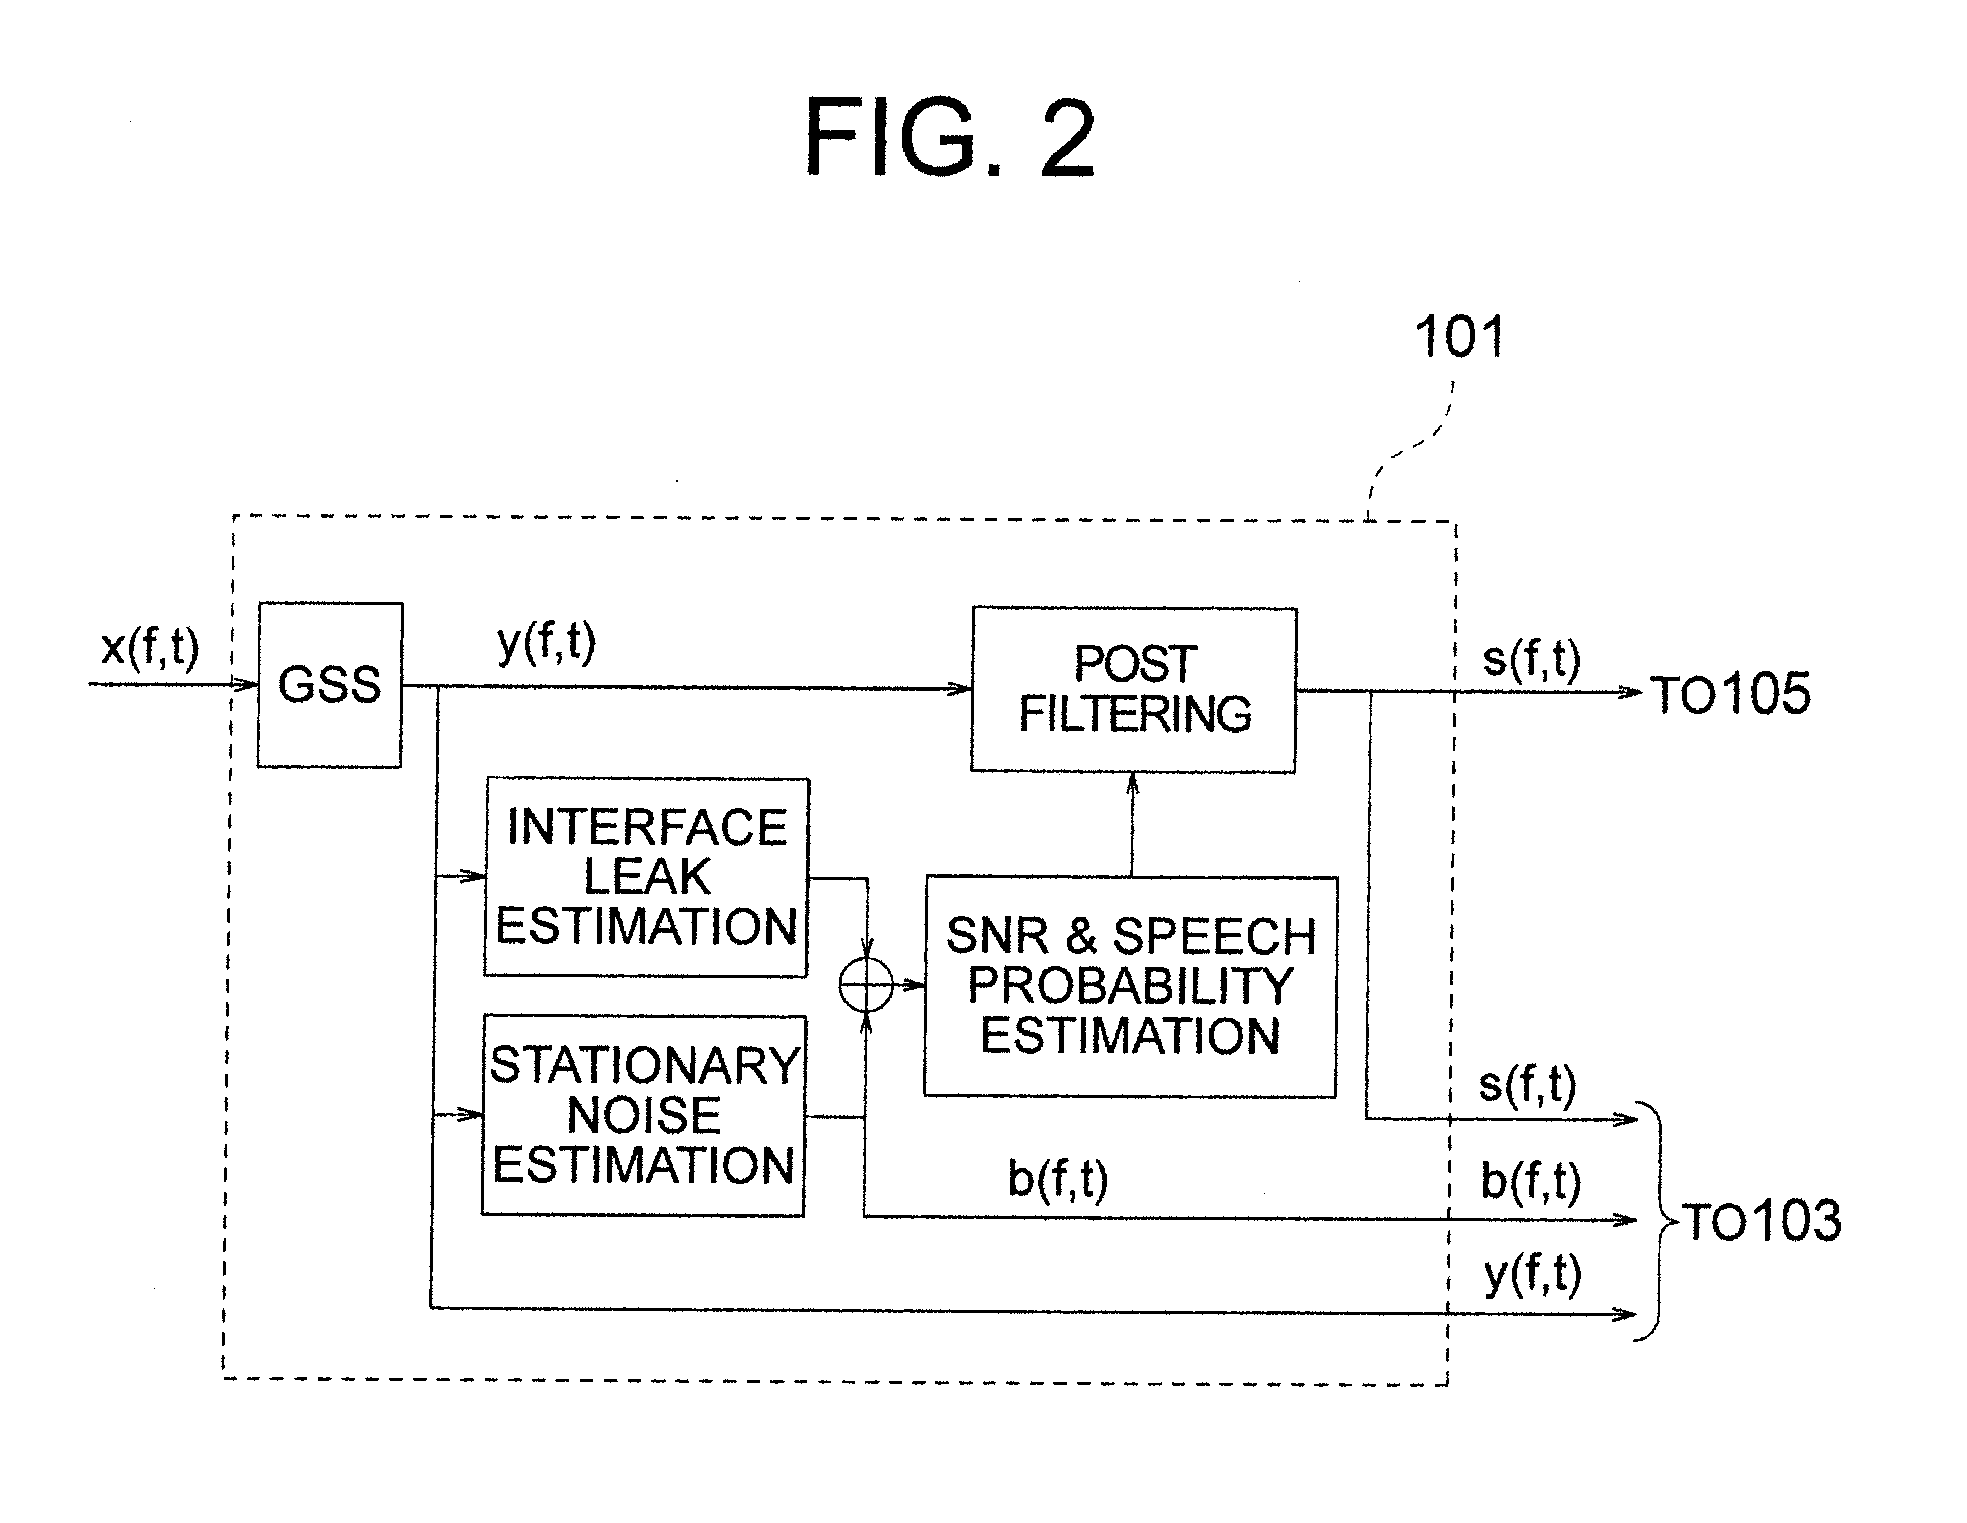 Speech recognition system and method for generating a mask of the system